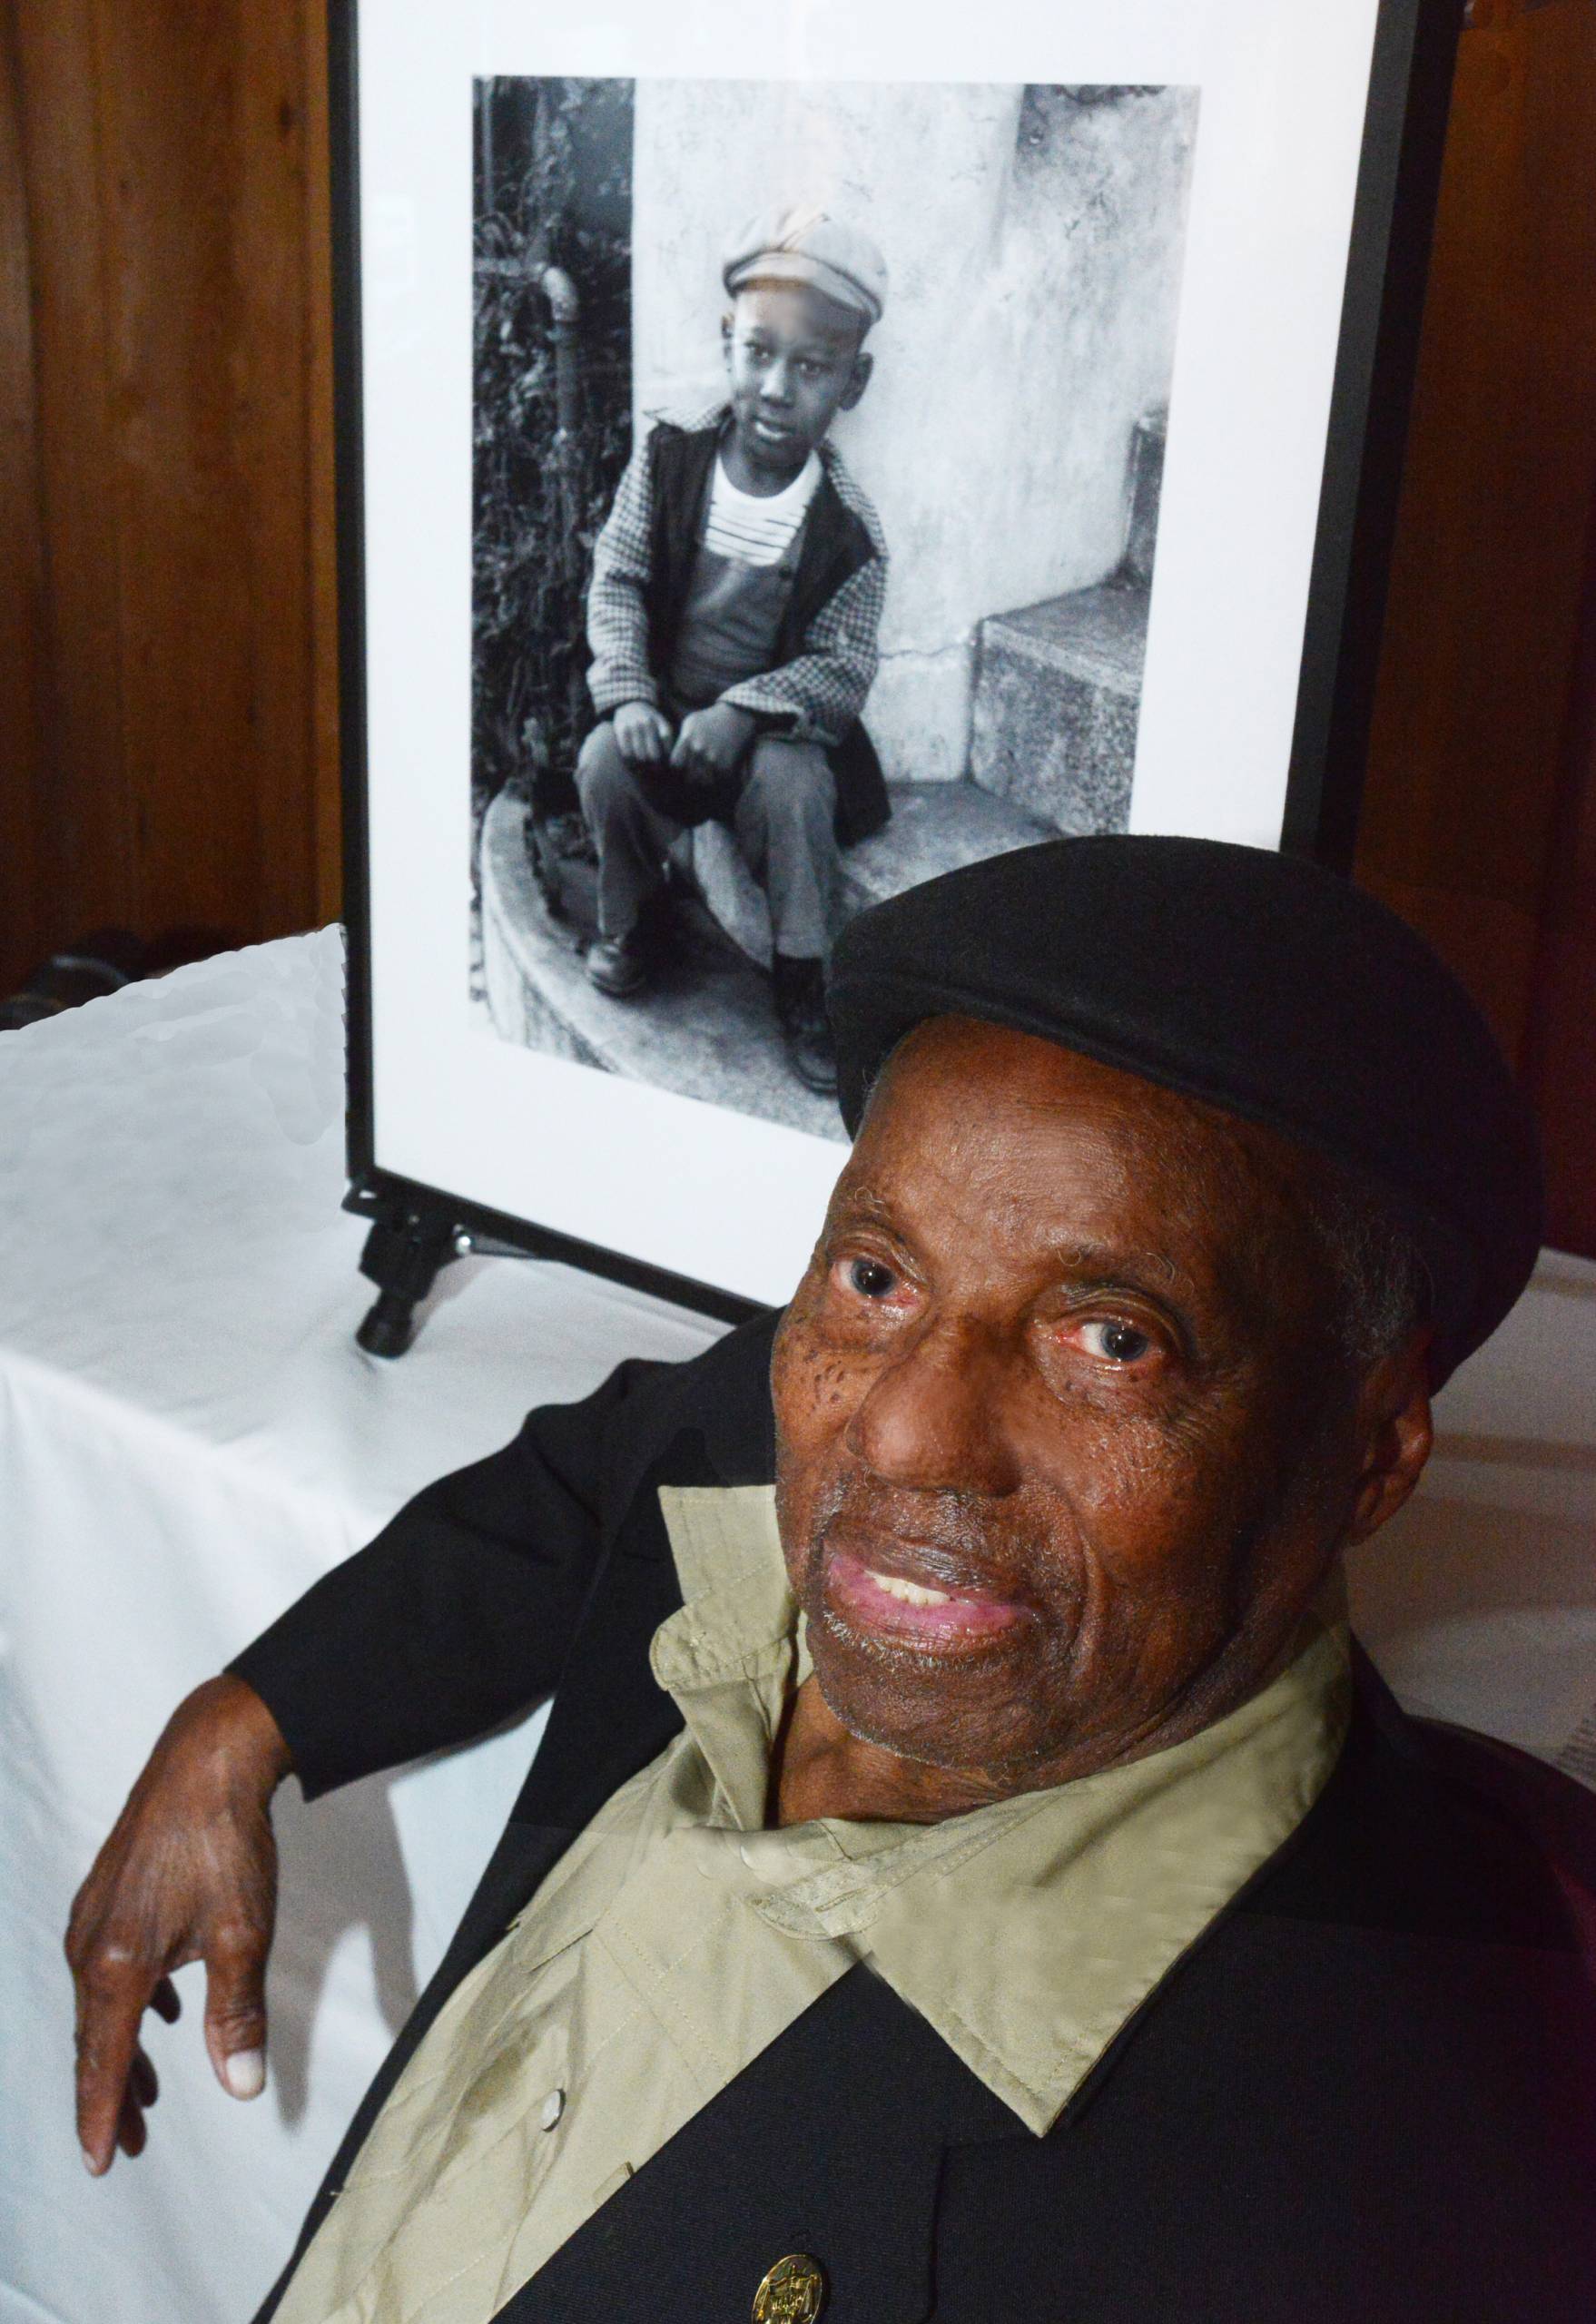 Portrait of older person sitting in front of framed photo of young person